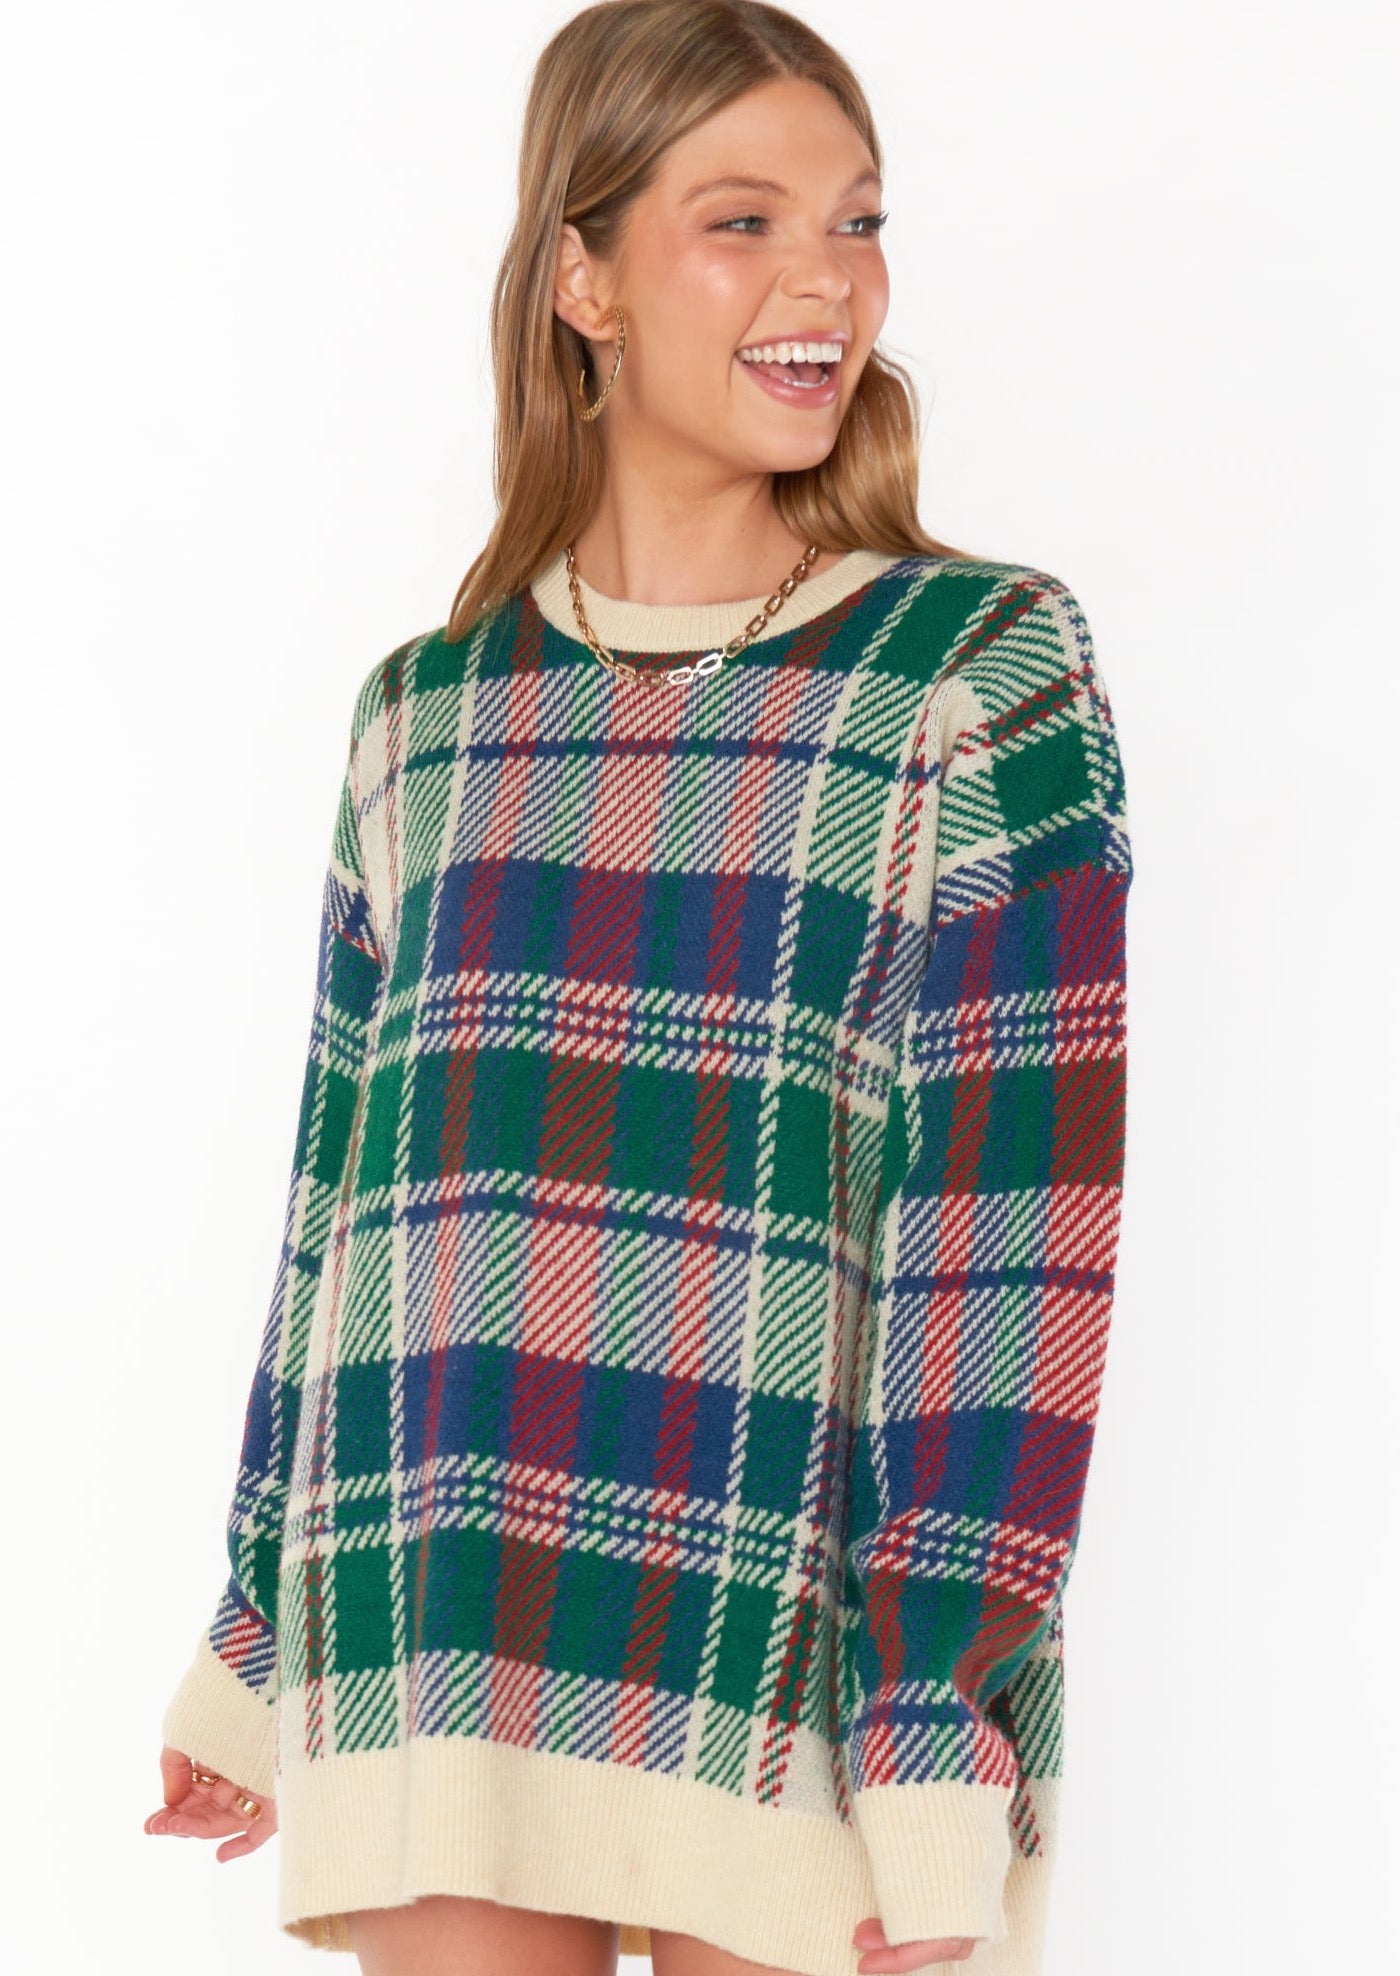 holiday green and red plaid sweater with cream hem, cuff, and collar details from Show Me Your Mumu